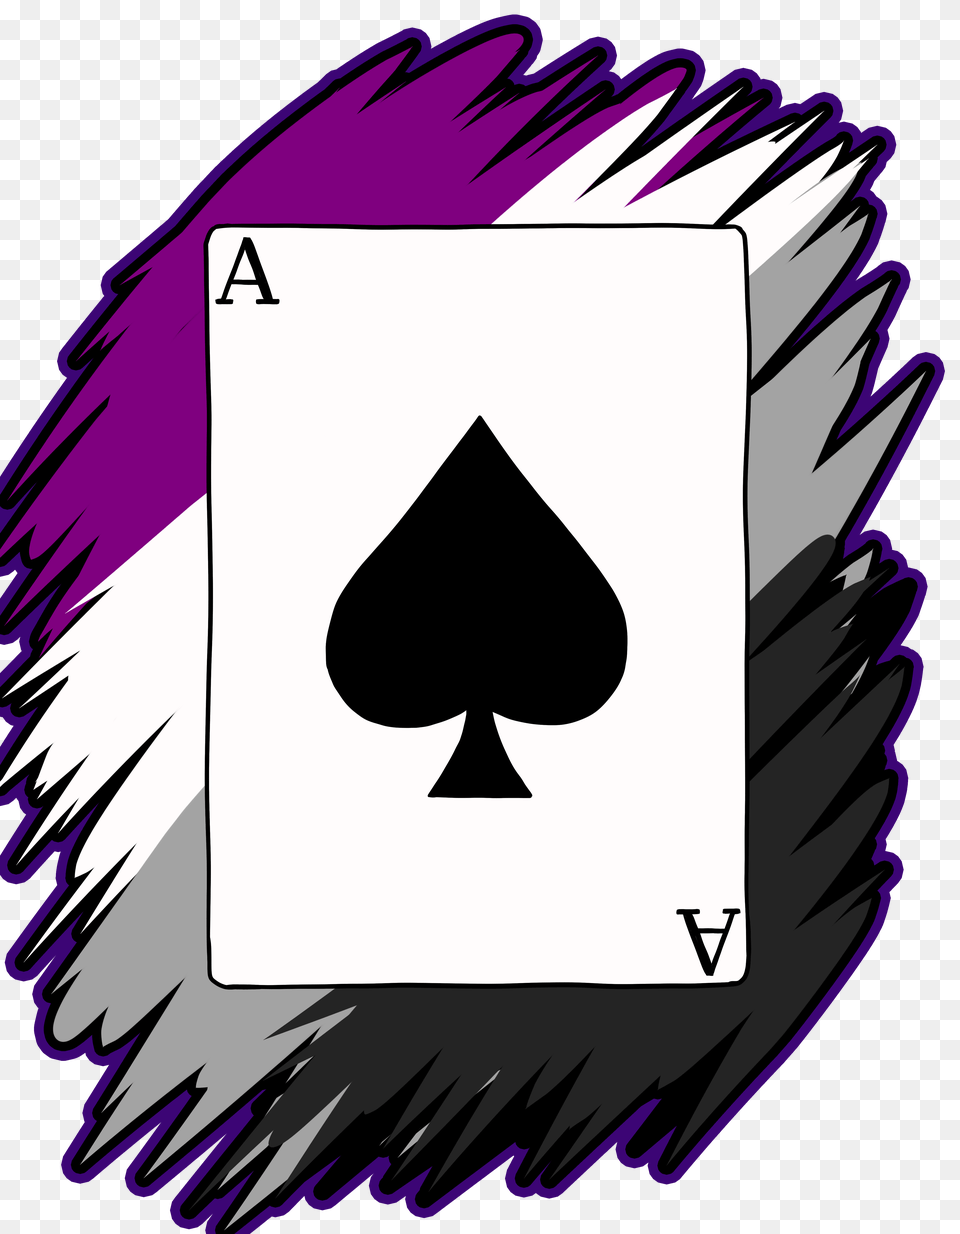 Playing The Ace Card Artworktee, Sticker, Symbol Free Transparent Png